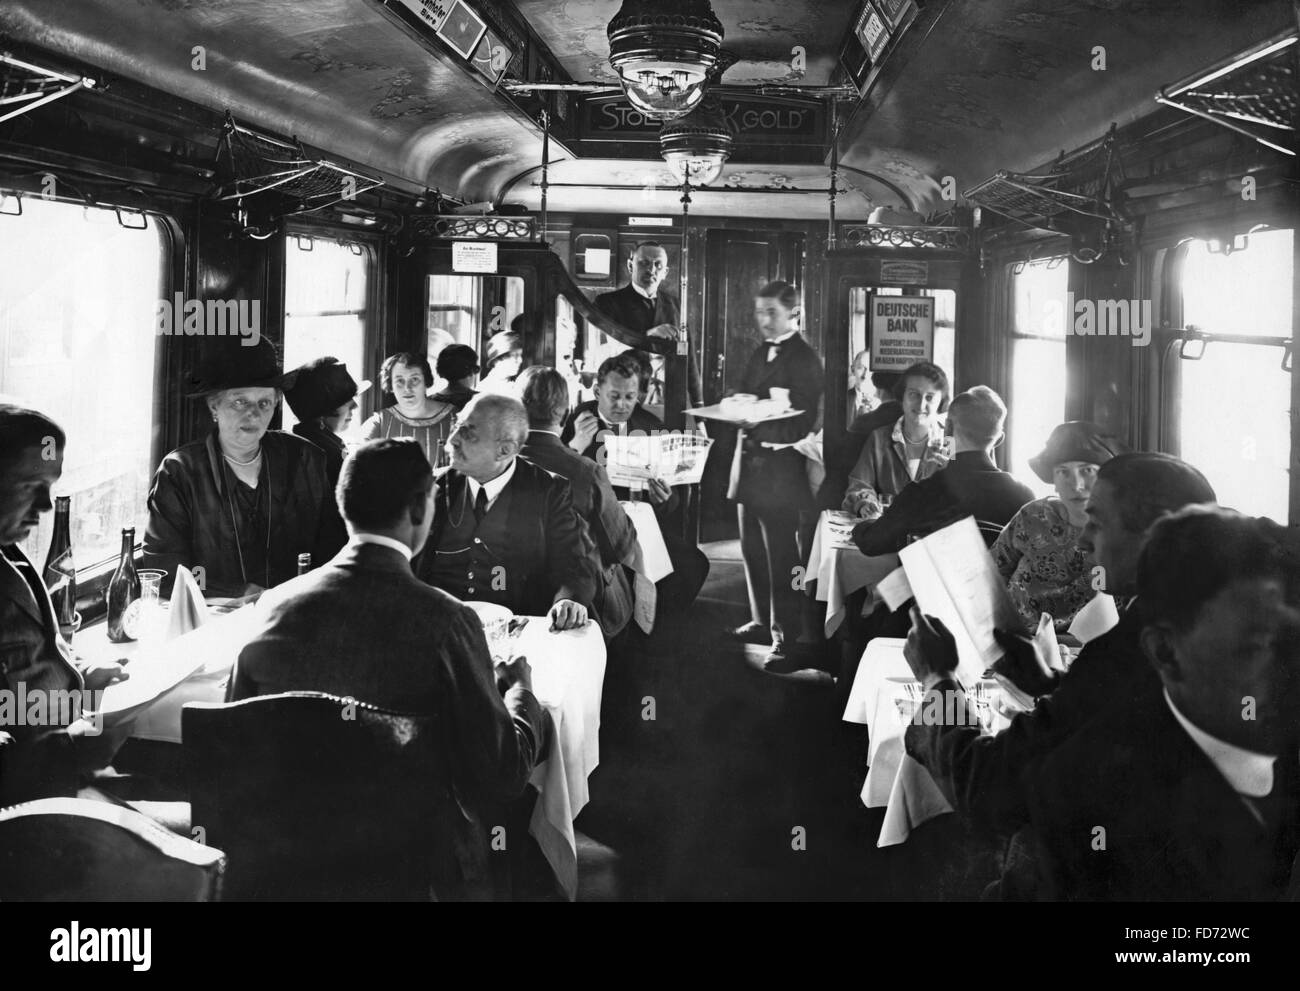 Railway dining car in Germany, 1926 Stock Photo